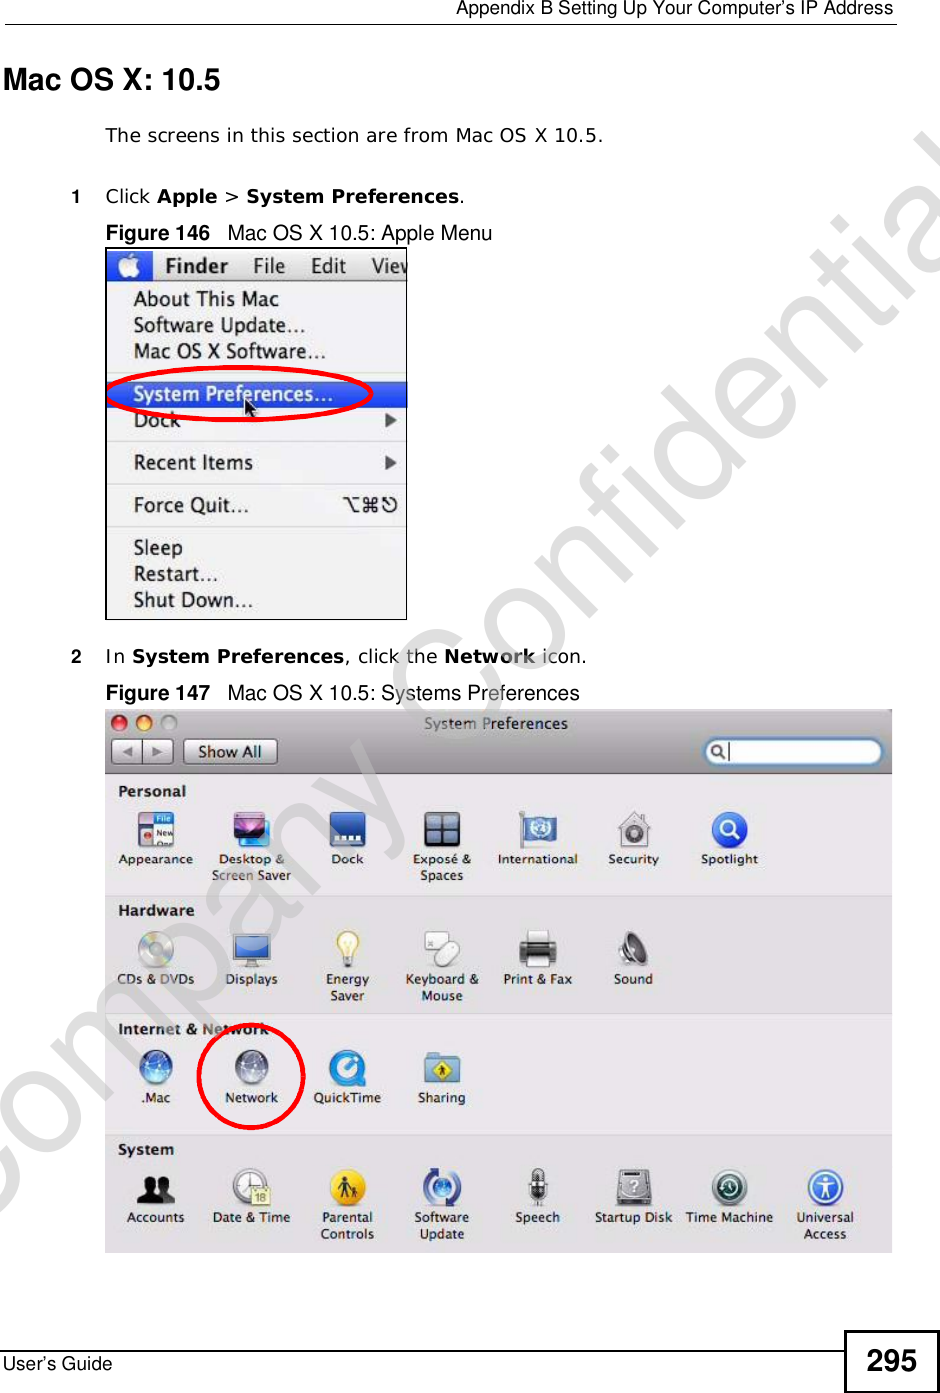  Appendix BSetting Up Your Computer’s IP AddressUser’s Guide 295Mac OS X: 10.5The screens in this section are from Mac OS X 10.5.1Click Apple &gt; System Preferences.Figure 146   Mac OS X 10.5: Apple Menu2In System Preferences, click the Network icon.Figure 147   Mac OS X 10.5: Systems PreferencesCompany Confidential